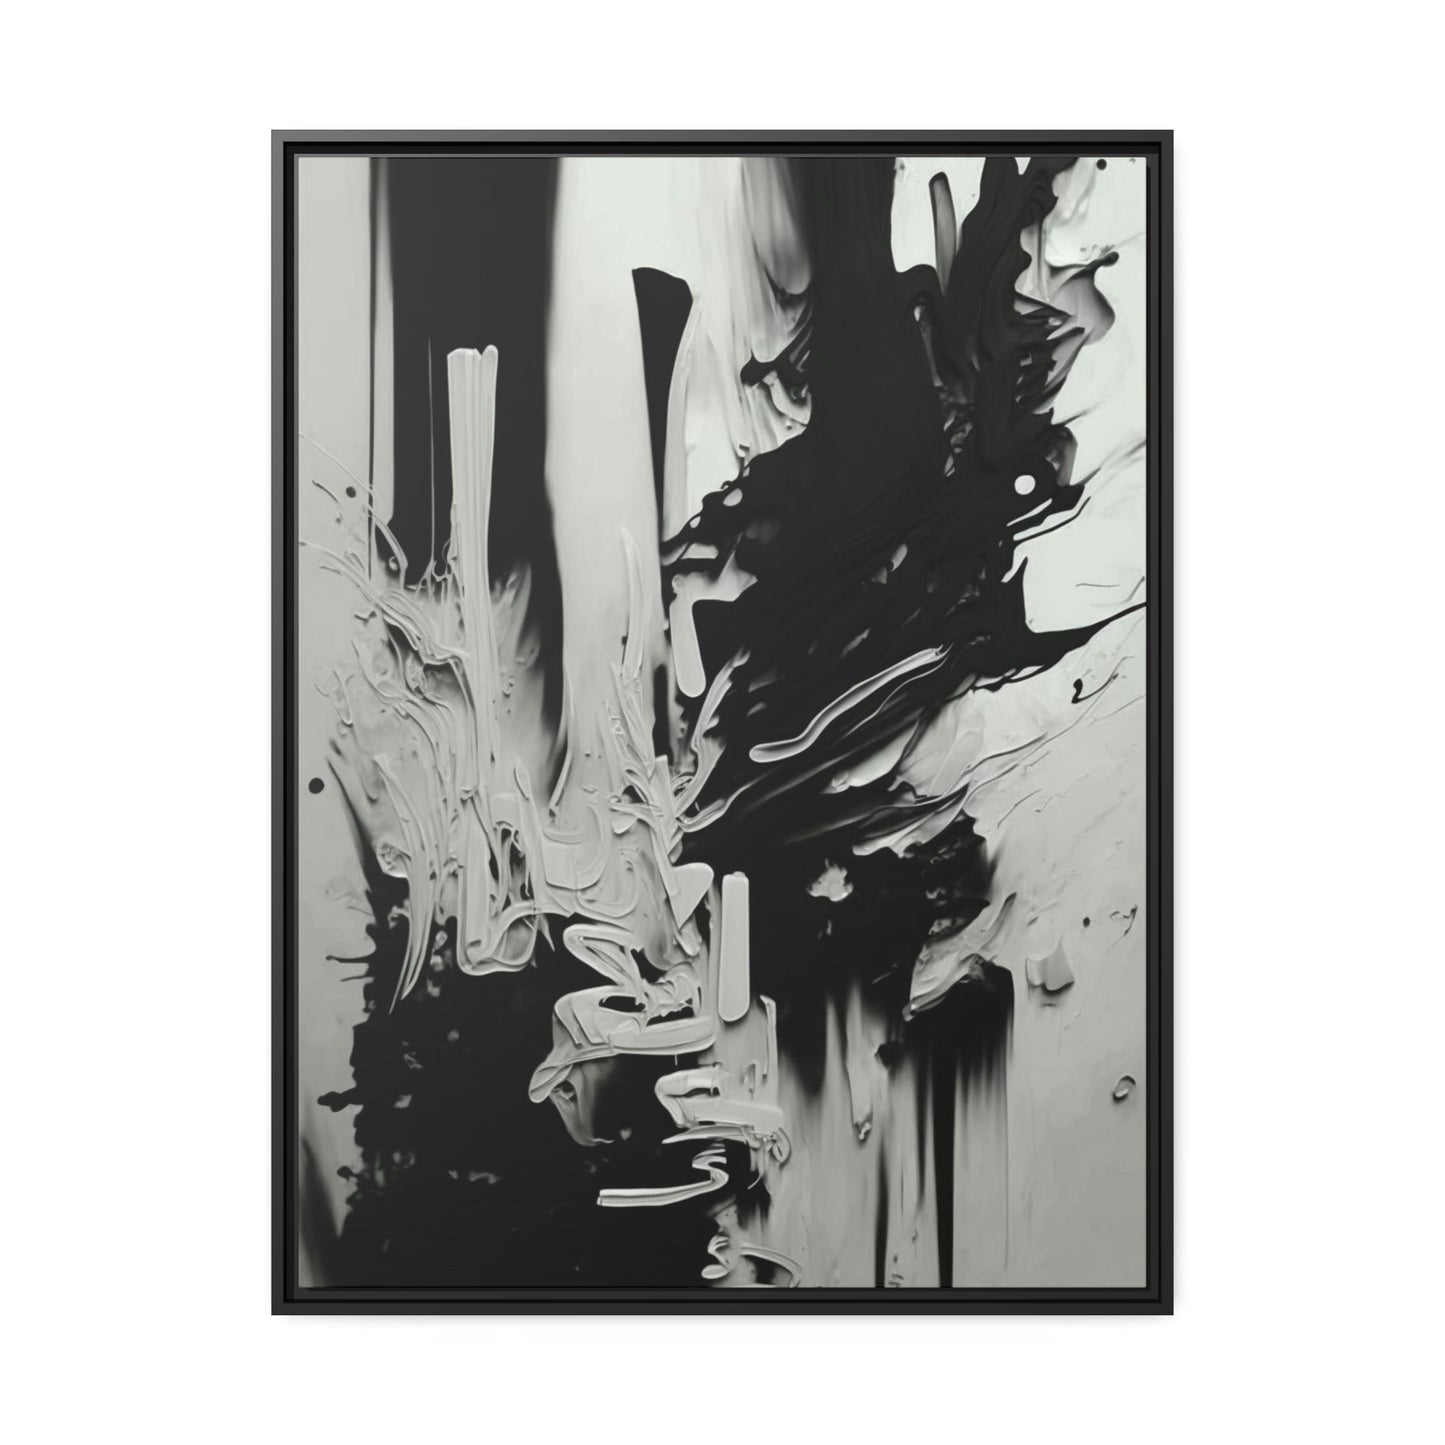 The Shadow's Dance: A Natural Canvas & Poster Painting of Abstract Shapes and Shadows